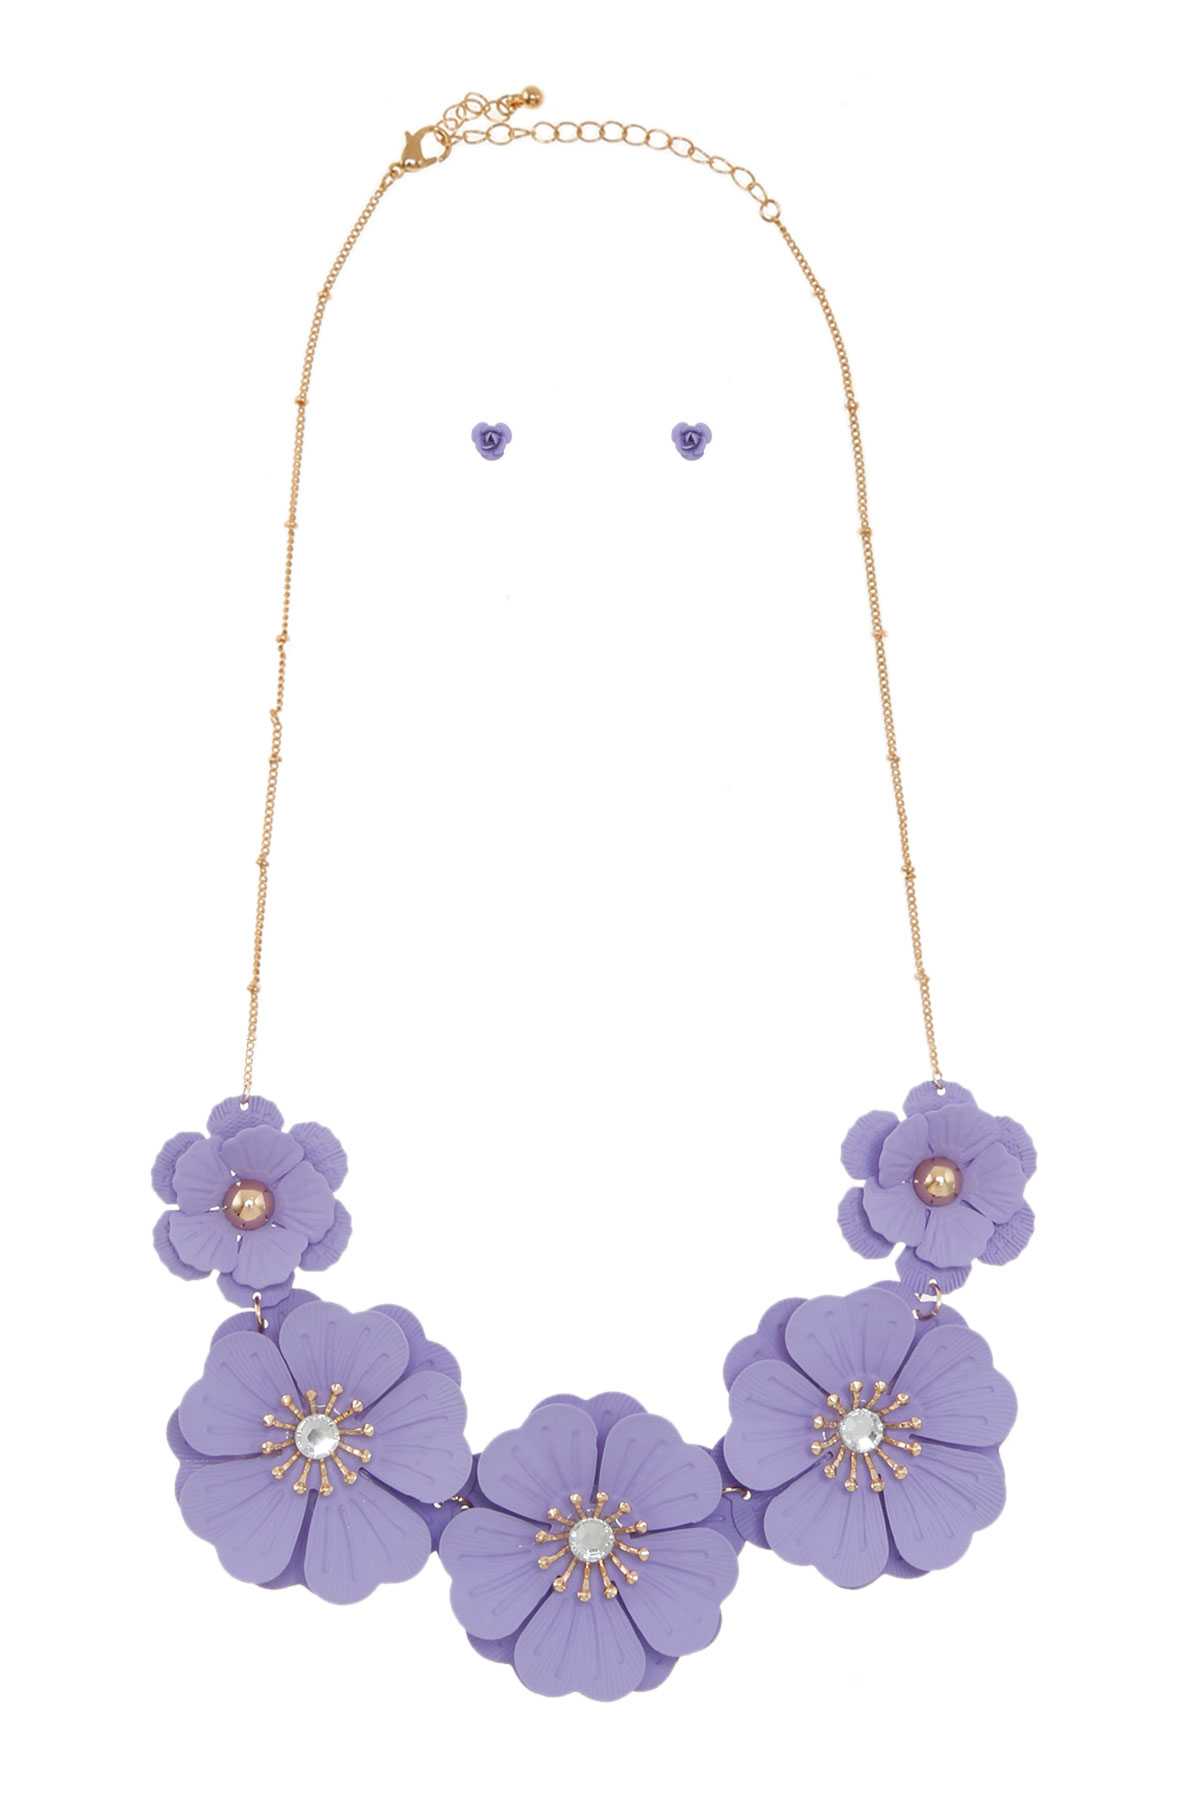 5 FLOWERS STATEMENT NECKLACE